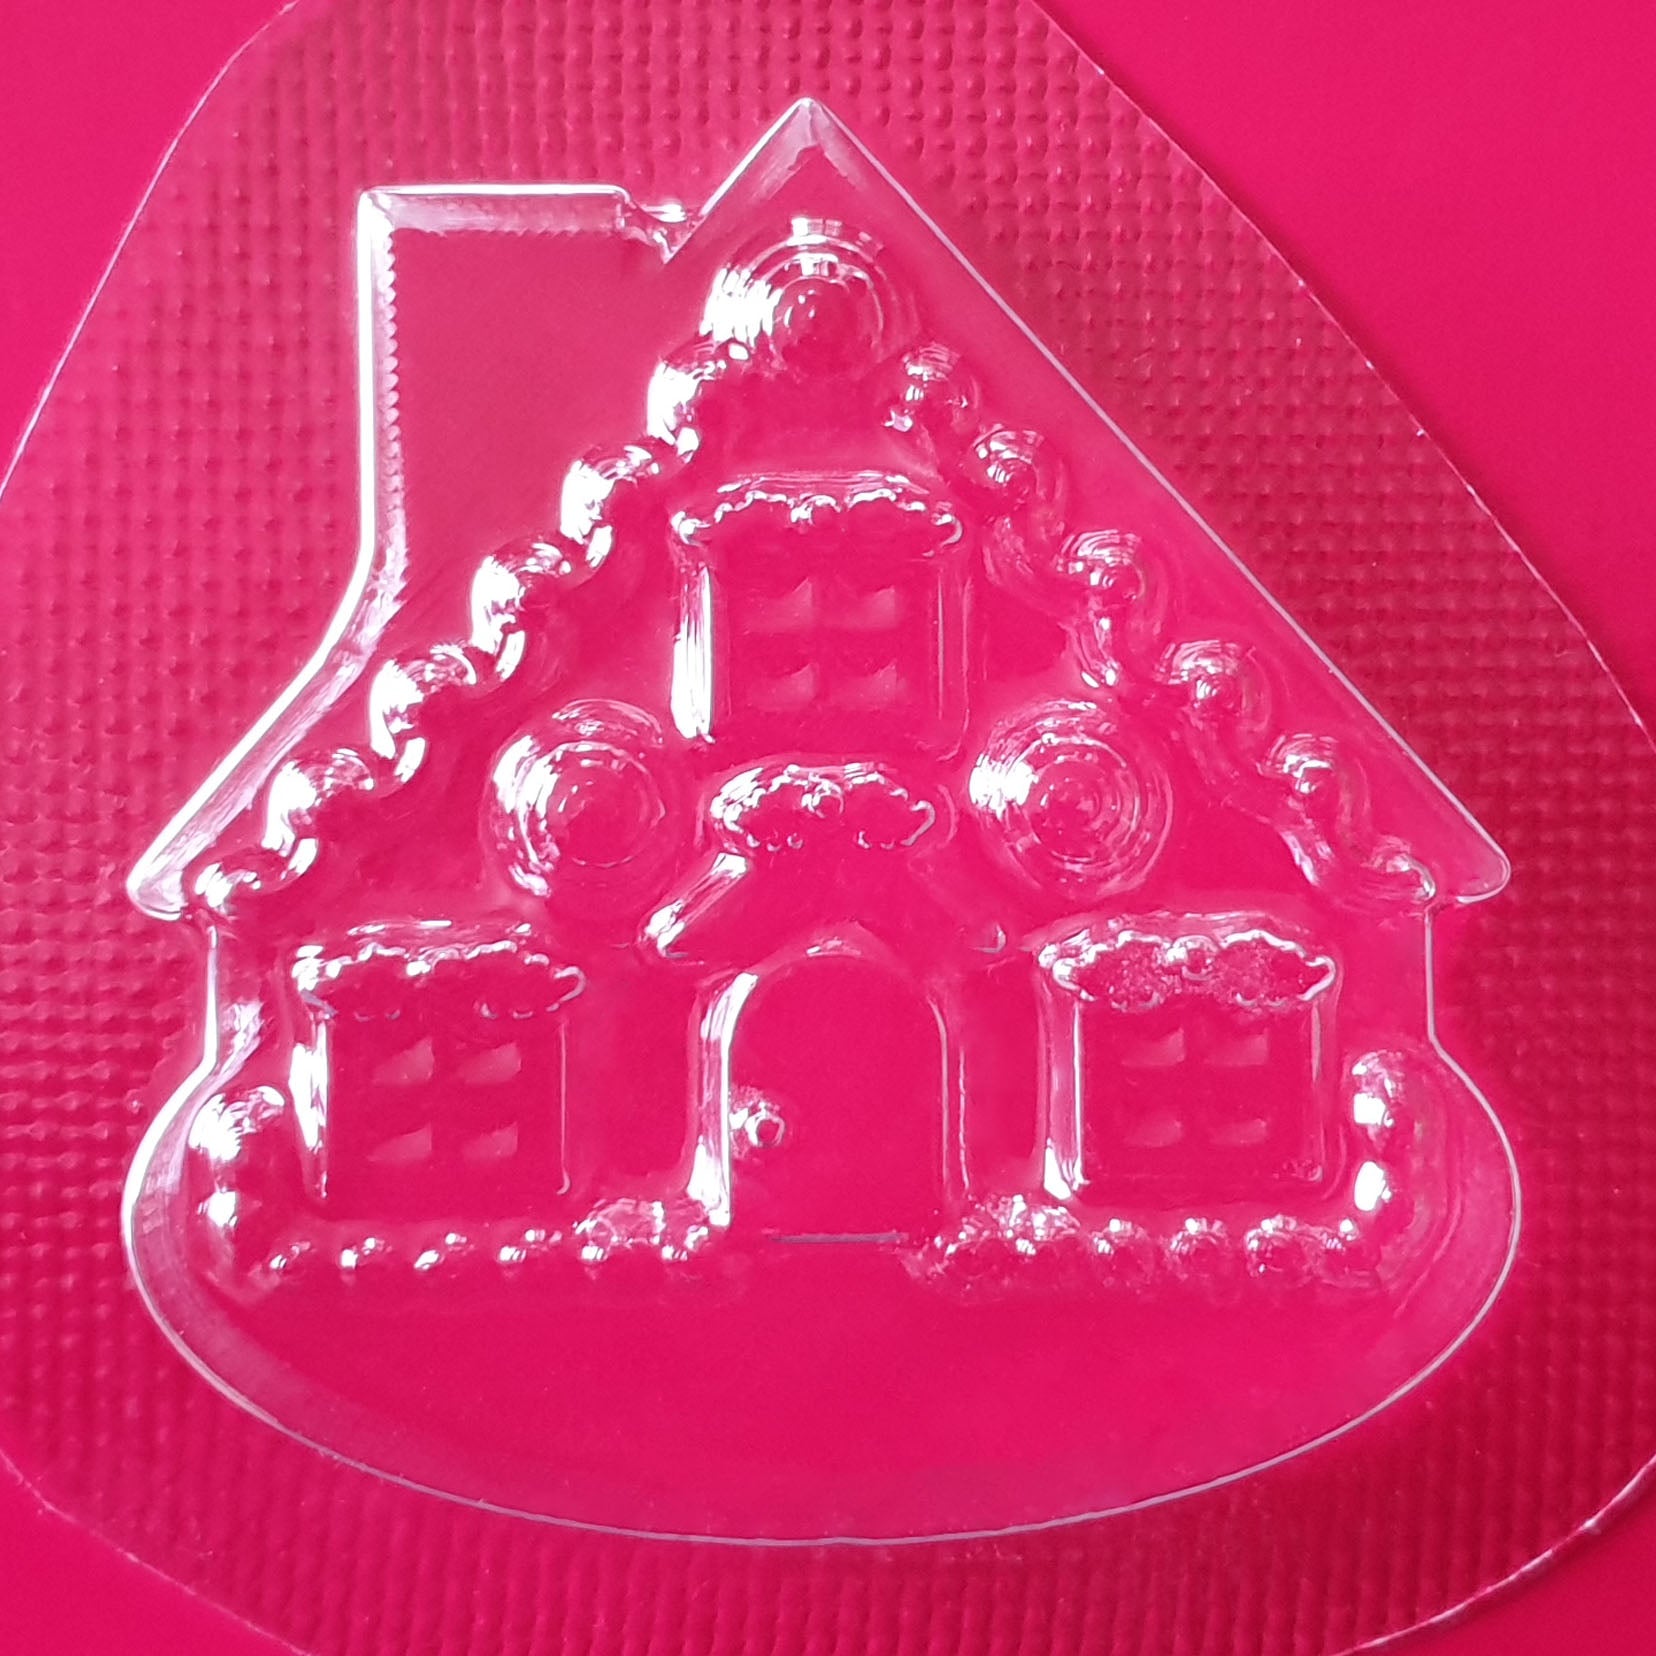 Gingerbread House Mould | Truly Personal | Bath Bomb, Soap, Resin, Chocolate, Jelly, Wax Melts Mold